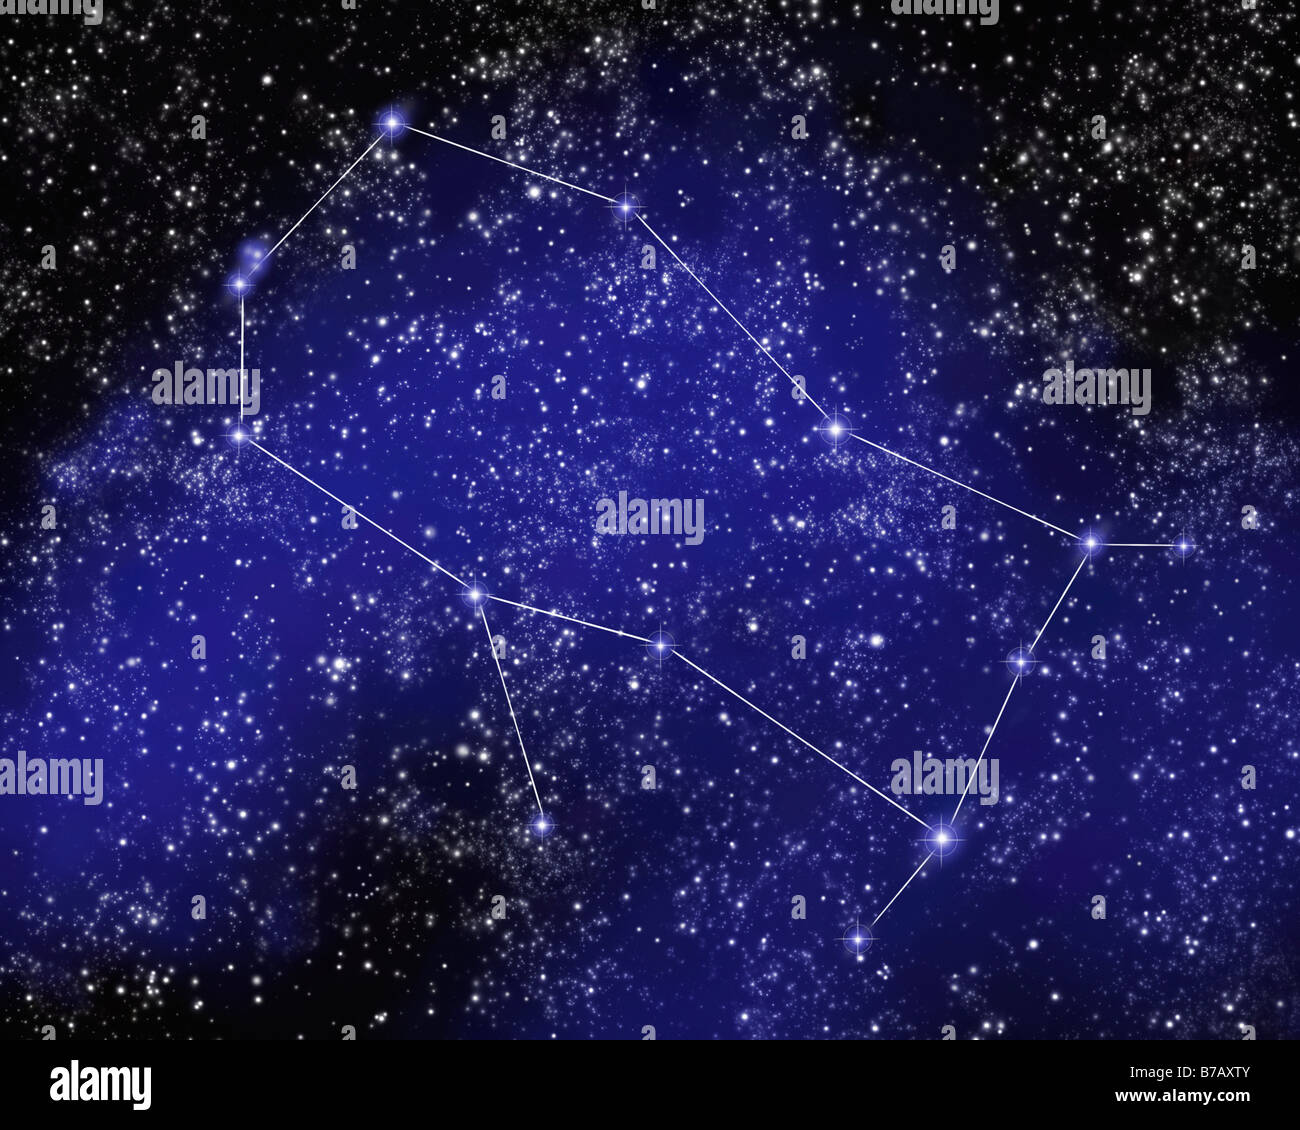 Outline of Constellation of Gemini in Night Sky Stock Photo